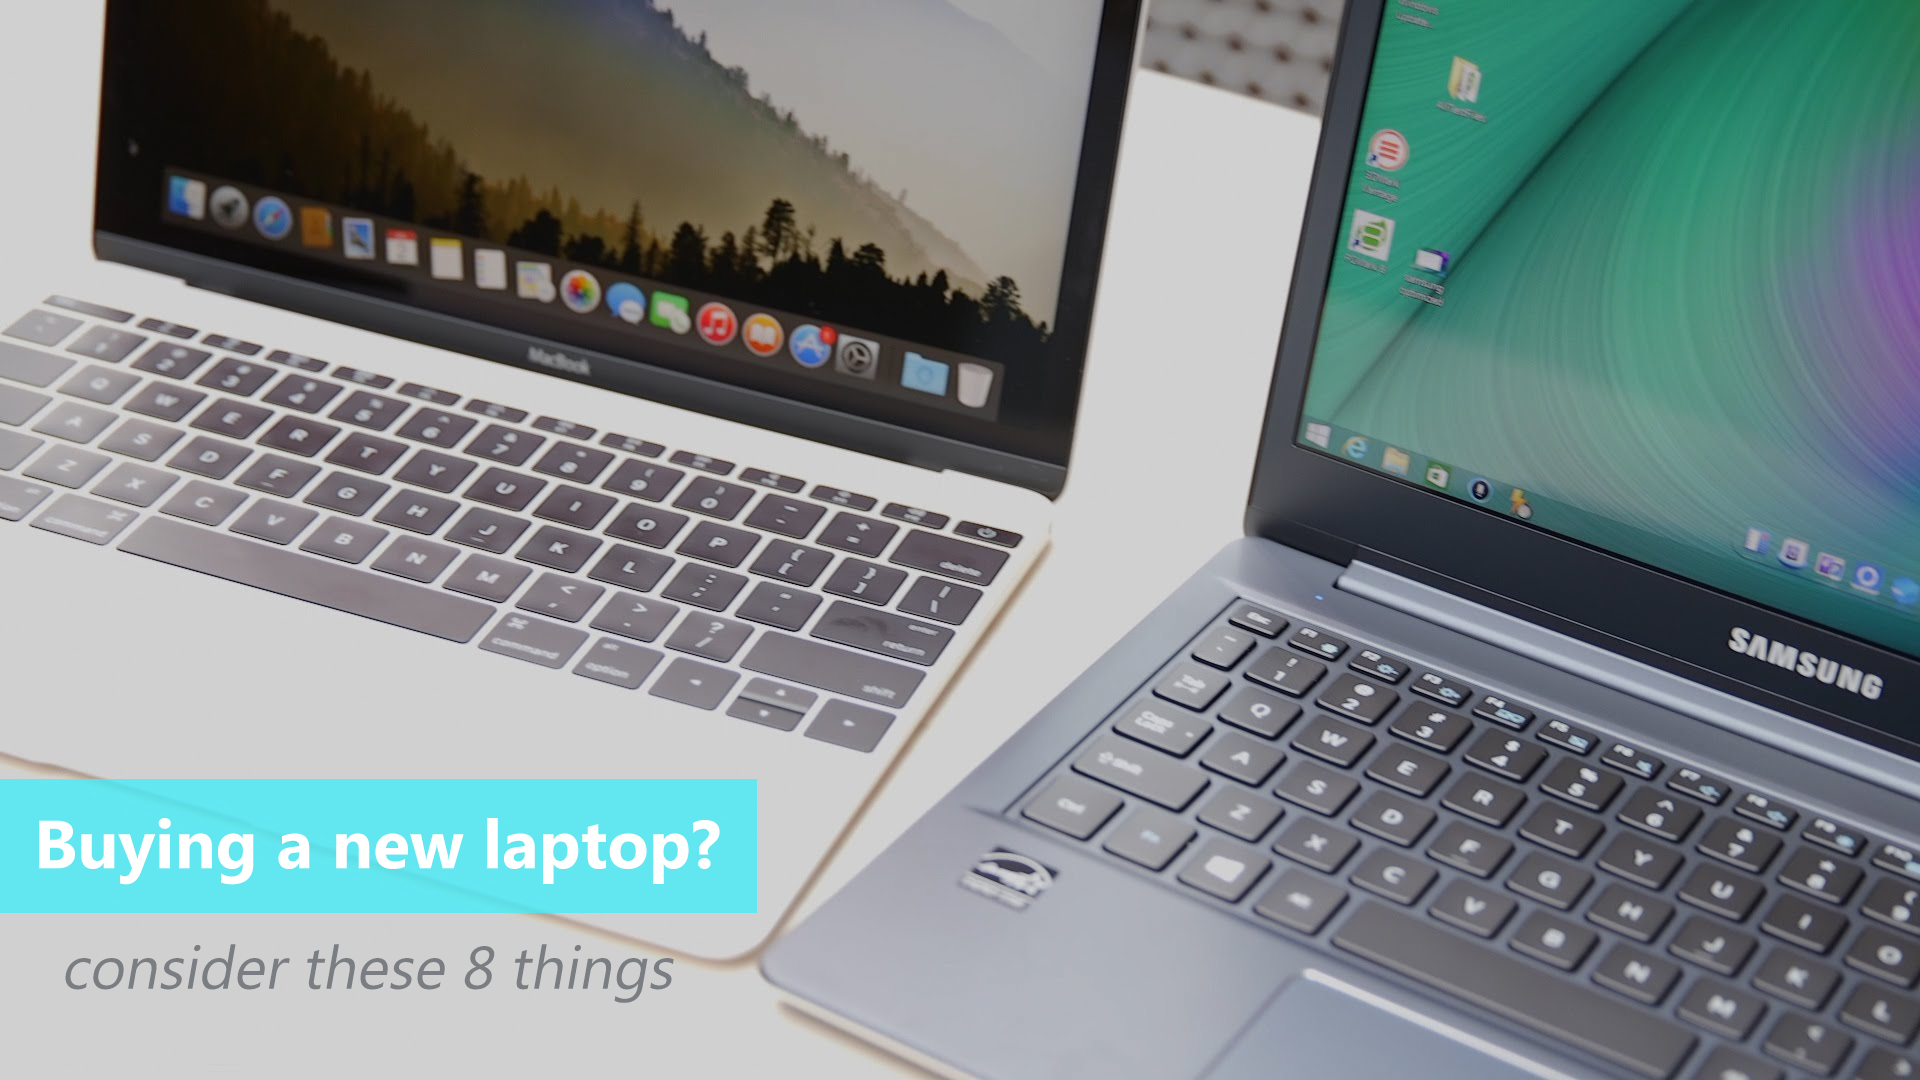 Buying a New Laptop? Here are 8 Important Things you Should Consider